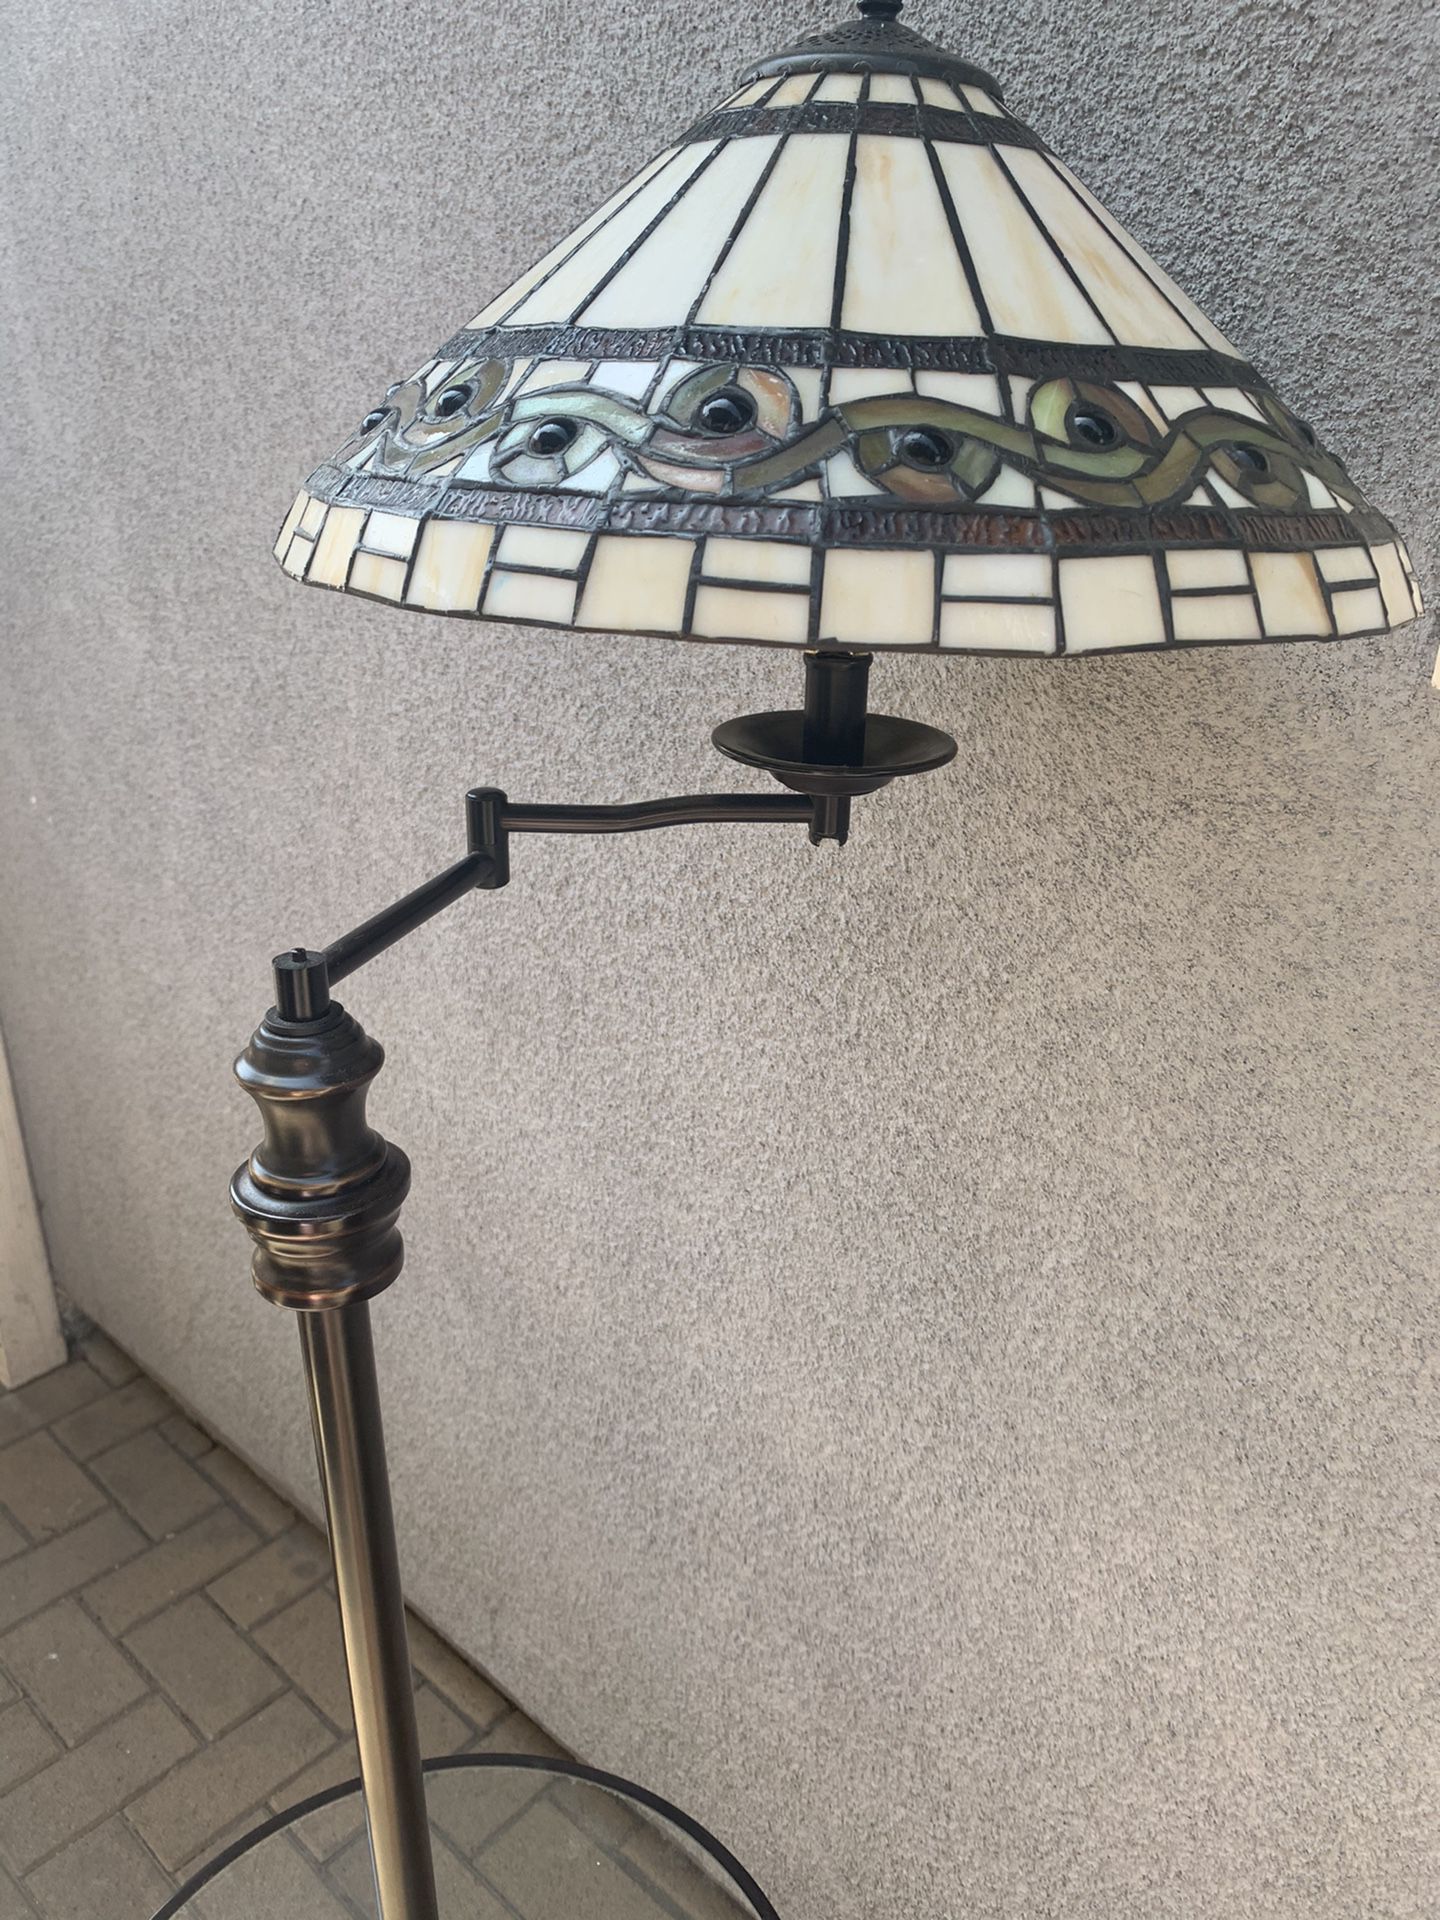 Tiffany style lamp with small table attached. Antique lamp stained glass